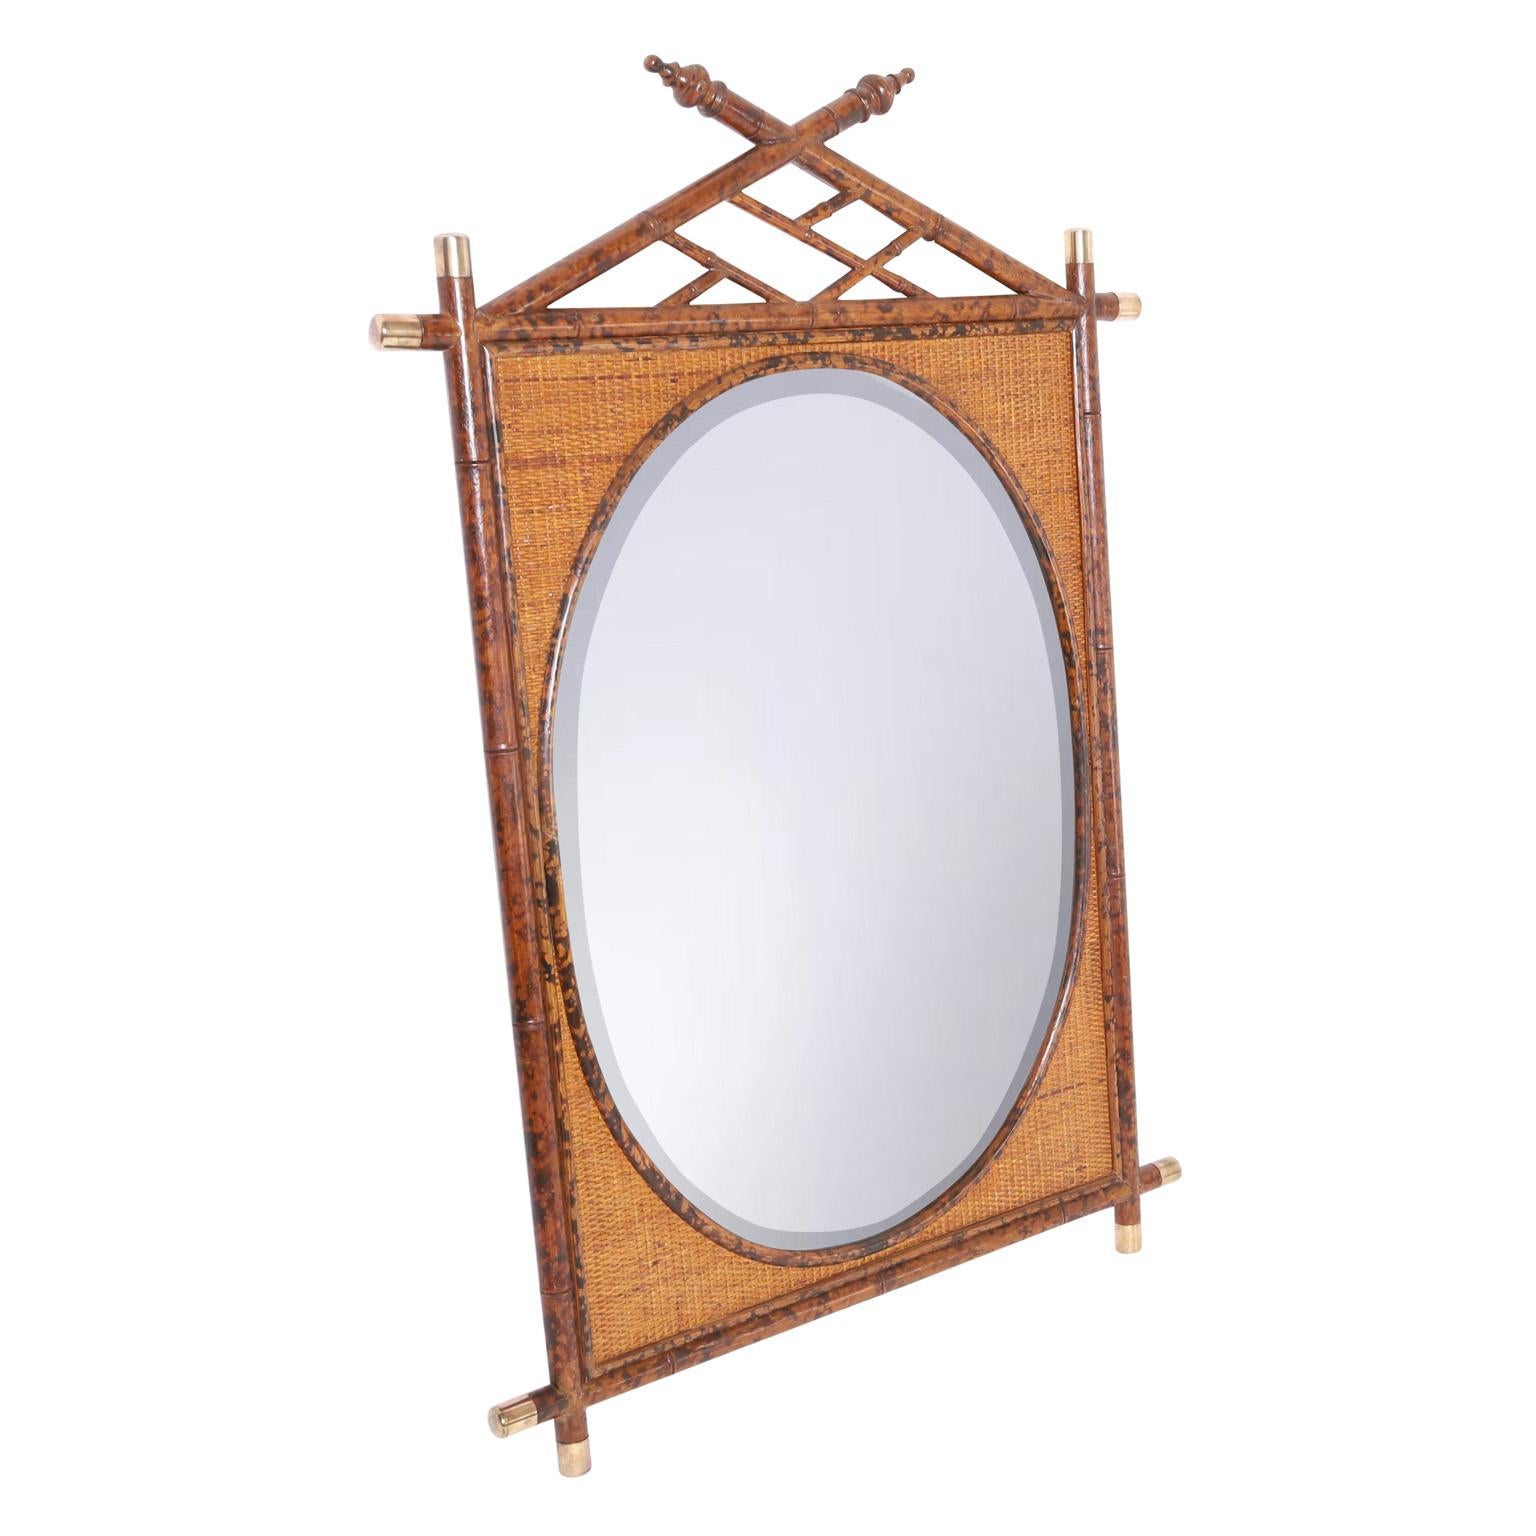 British colonial style wall mirror having a rectangular frame crafted in faux burnt bamboo with brass caps, a chippendale style crest, and grasscloth panels around an oval beveled looking glass.